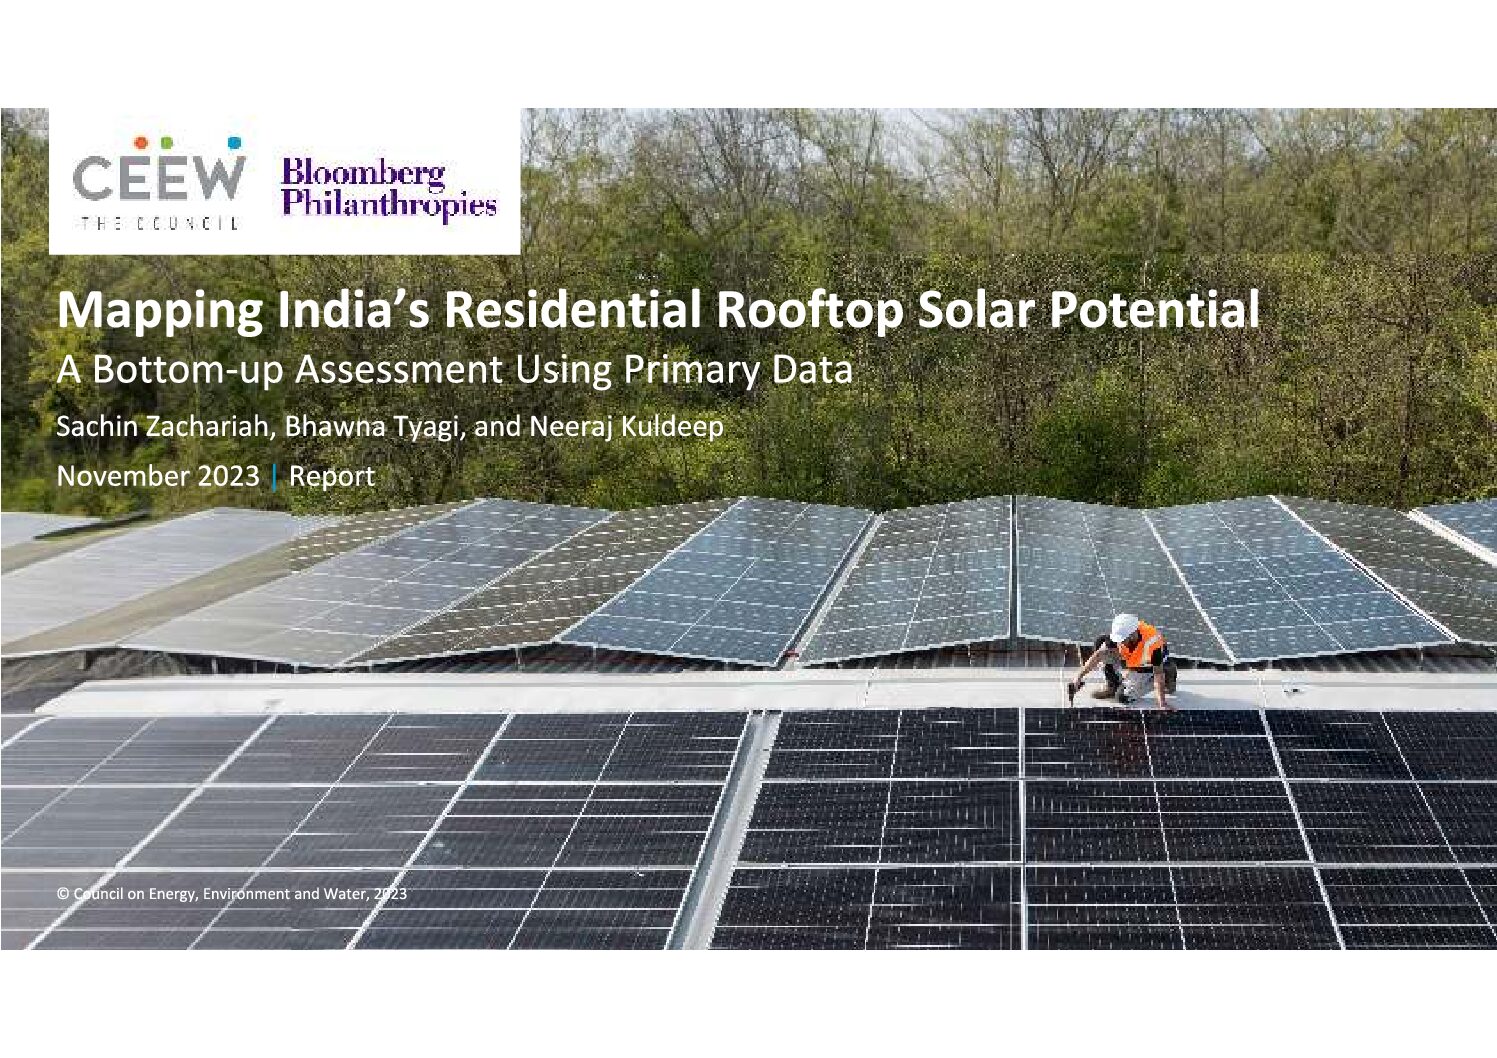 https://img.saurenergy.com/2023/11/ceew-profile-picture-mapping-rooftop-potencial-pdf.jpg